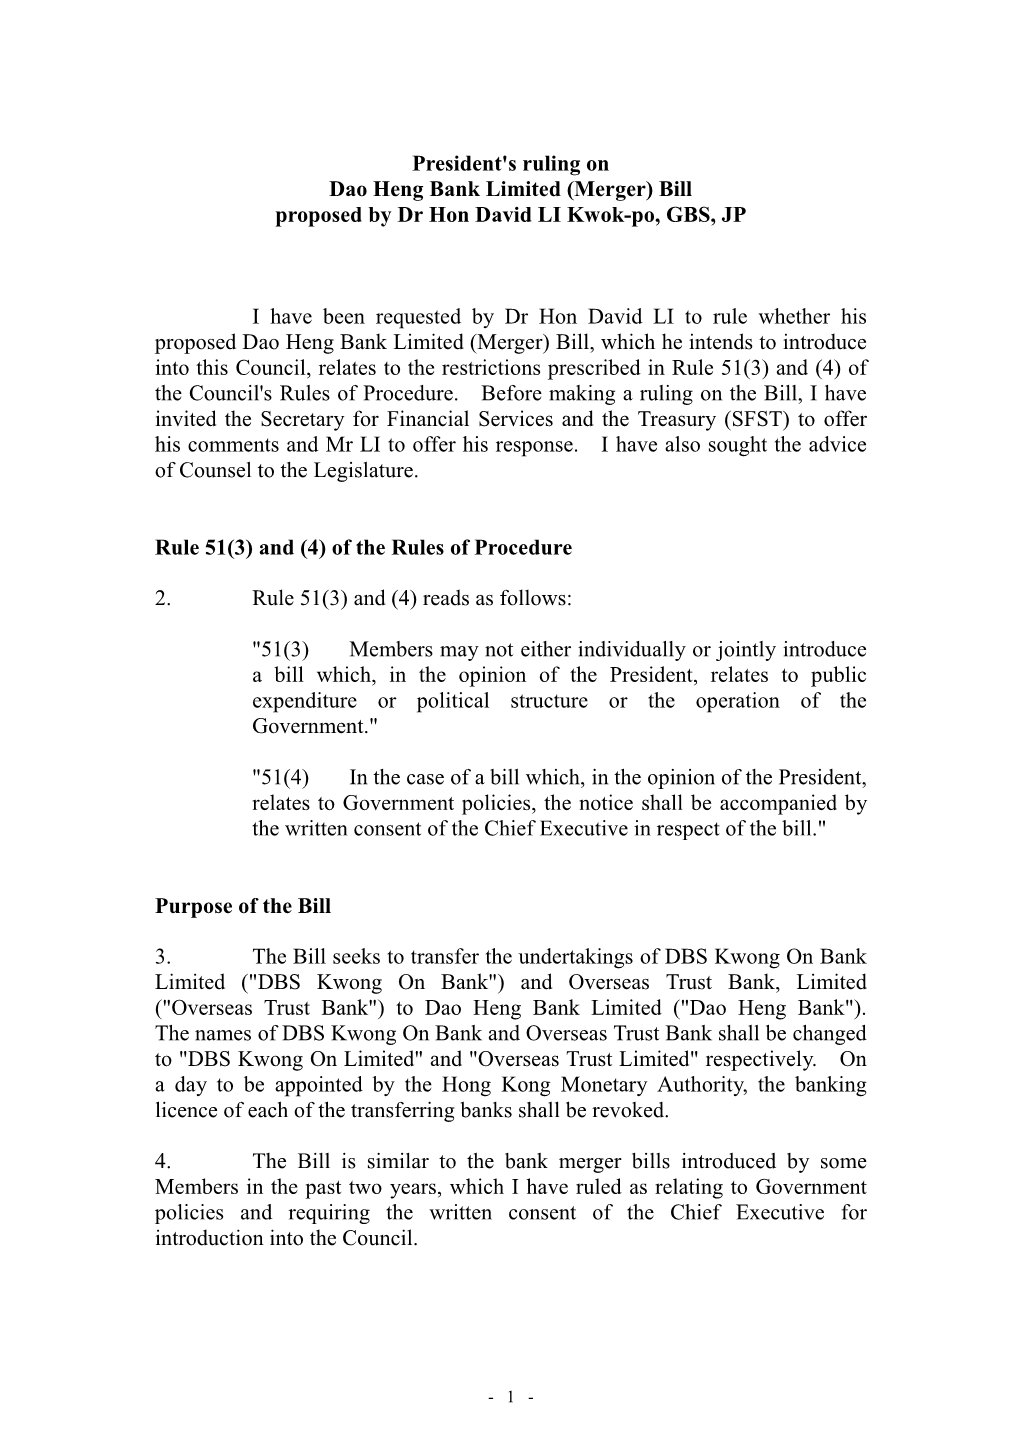 President's Ruling on Dao Heng Bank Limited (Merger) Bill Proposed by Dr Hon David LI Kwok-Po, GBS, JP I Have Been Requested By